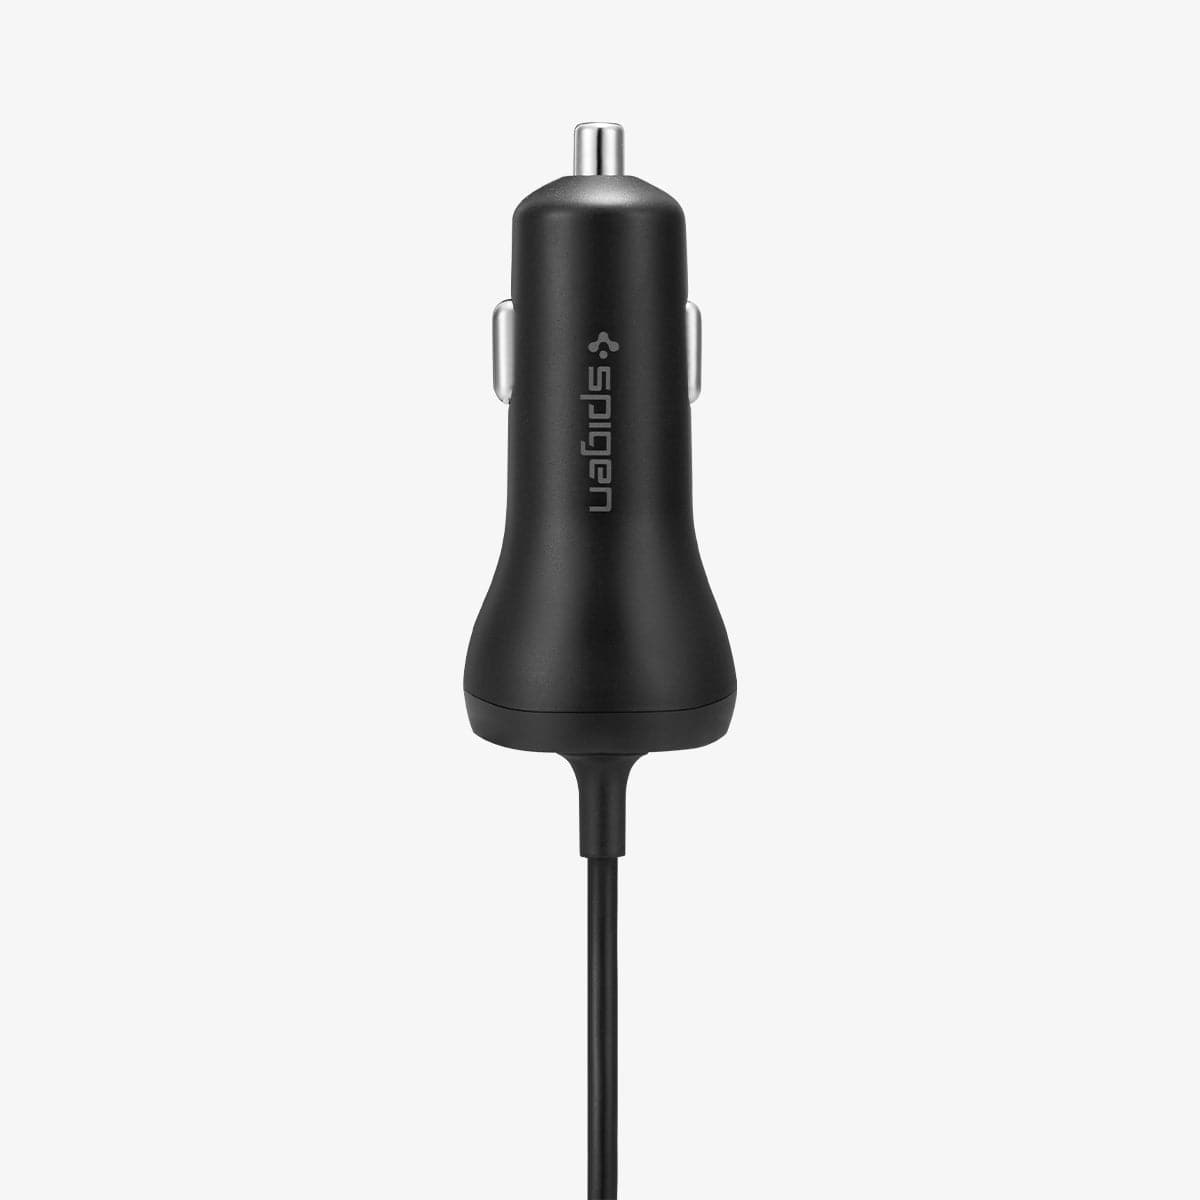 000CP25596 - SteadiBoost™ Built-in USB-C PD3.0 Car Charger showing the front